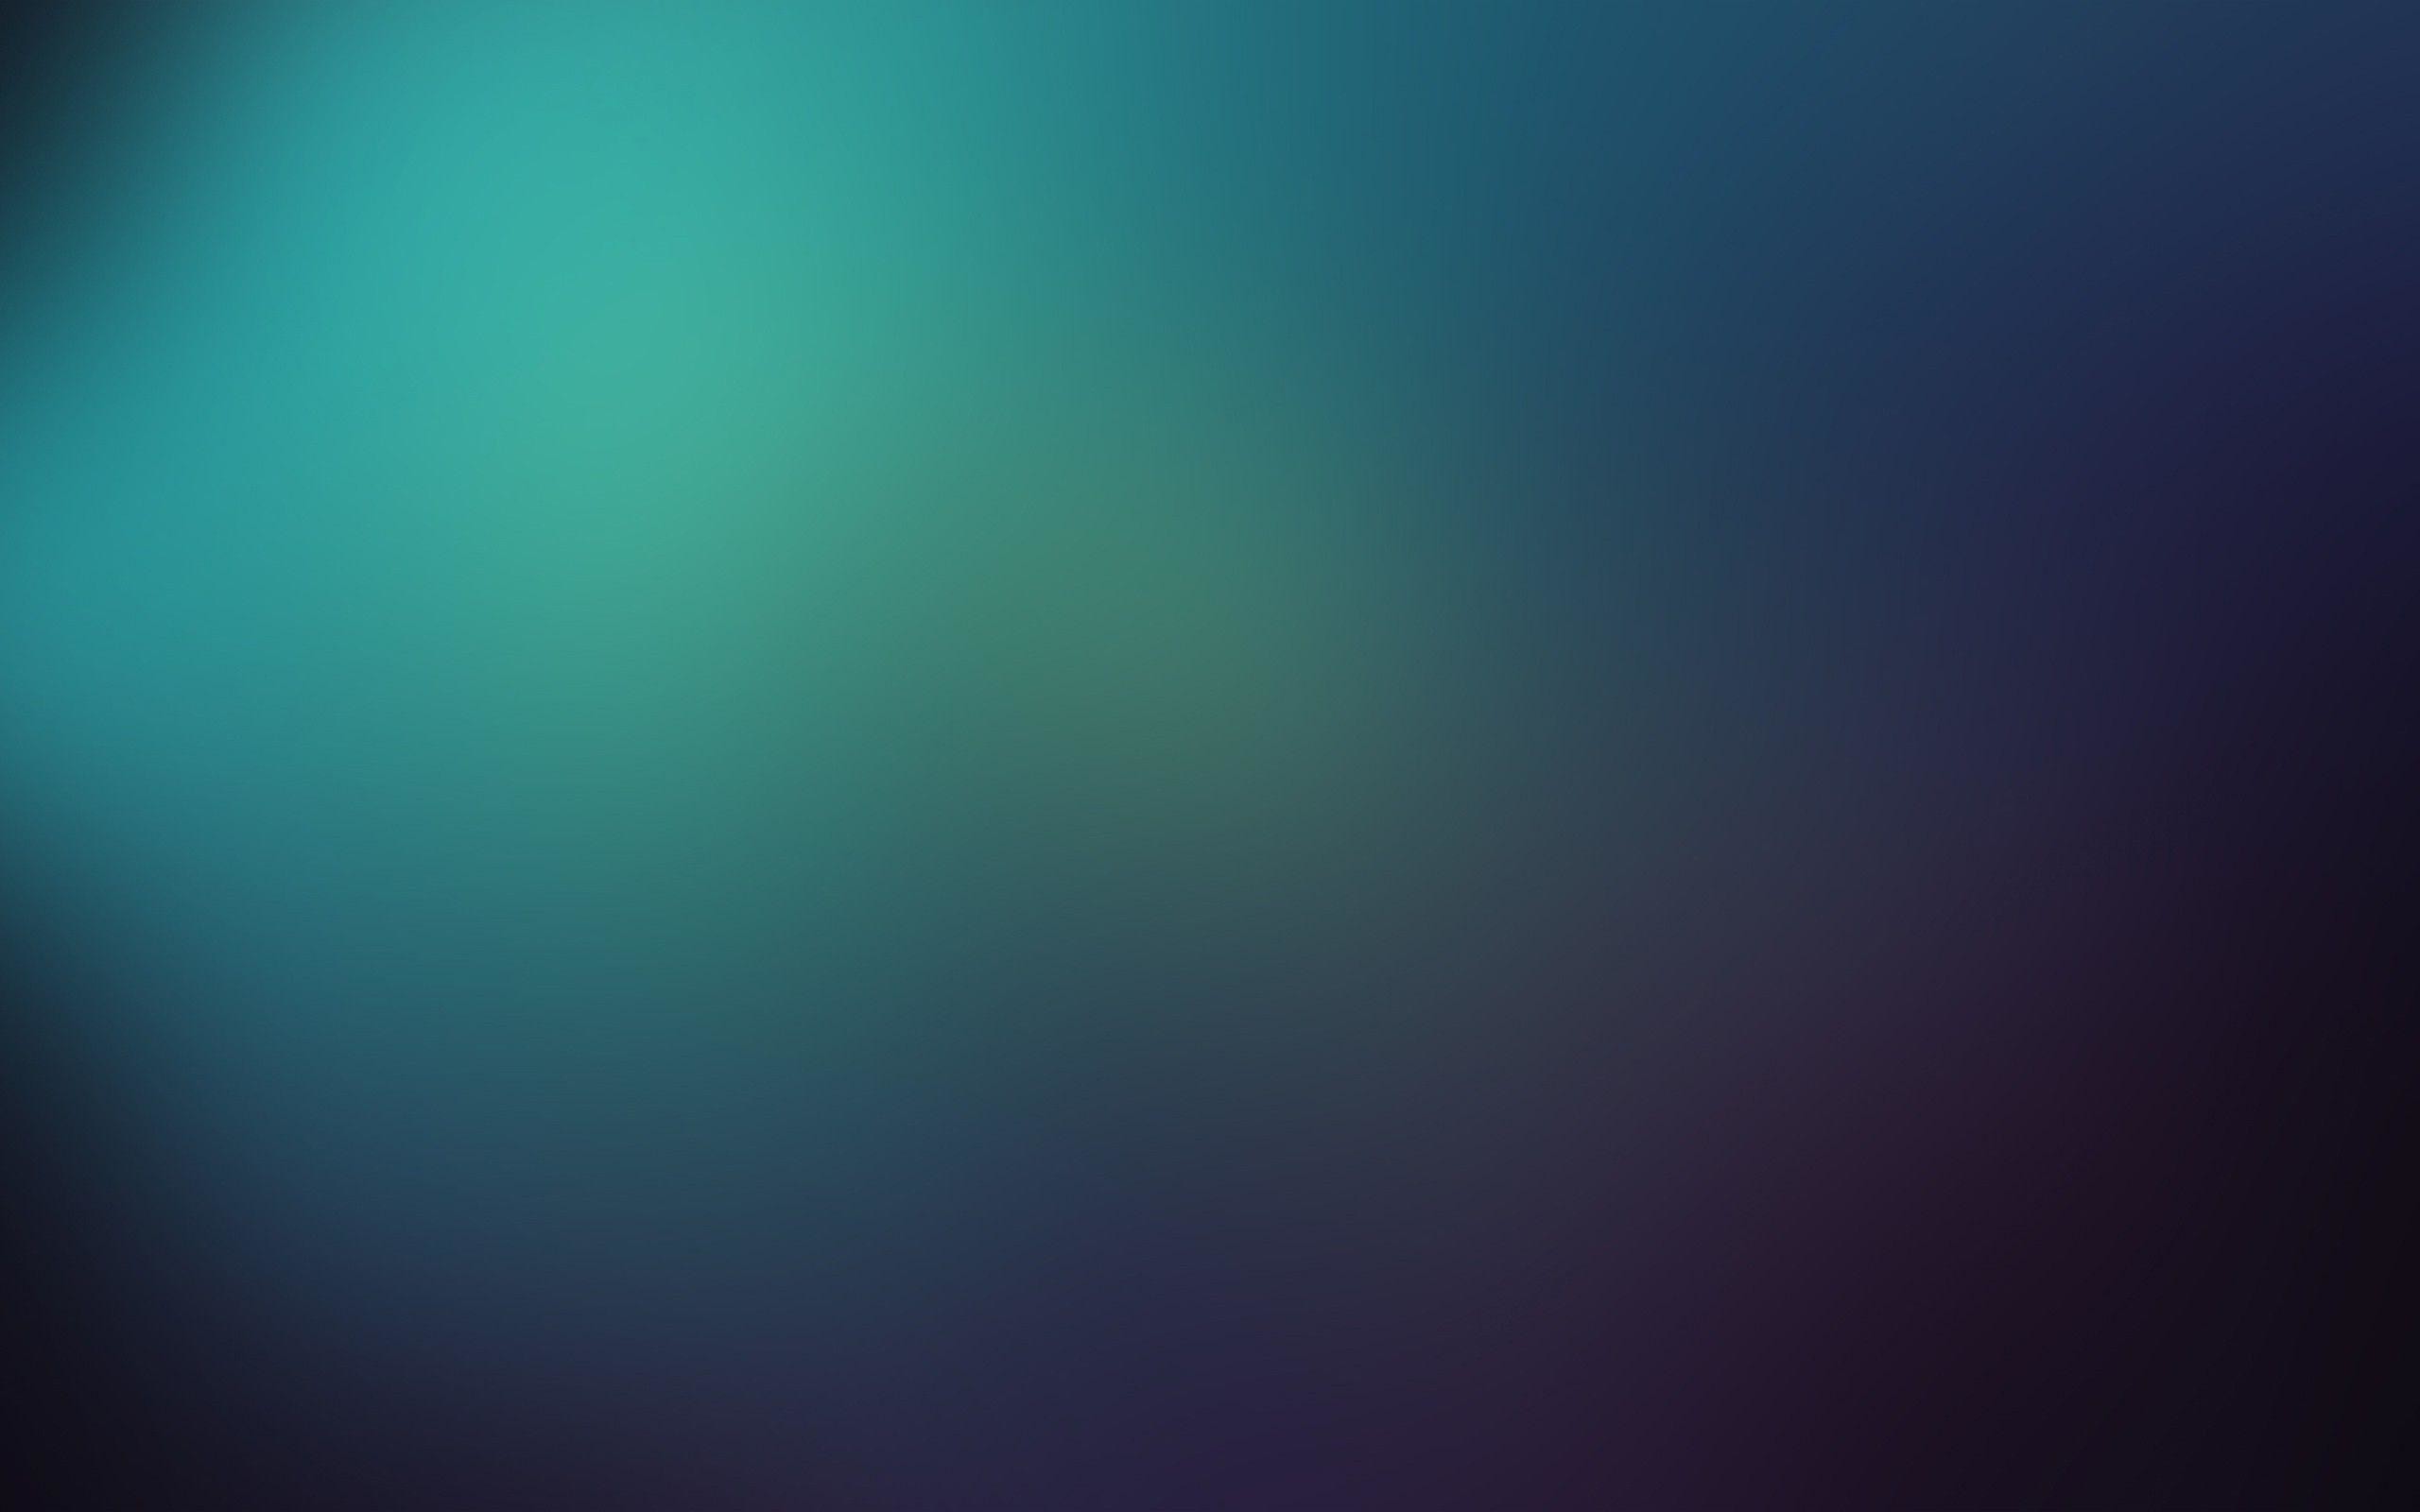 2560x1600 Most Downloaded Blue Gradient Wallpapers - Full HD wallpaper search